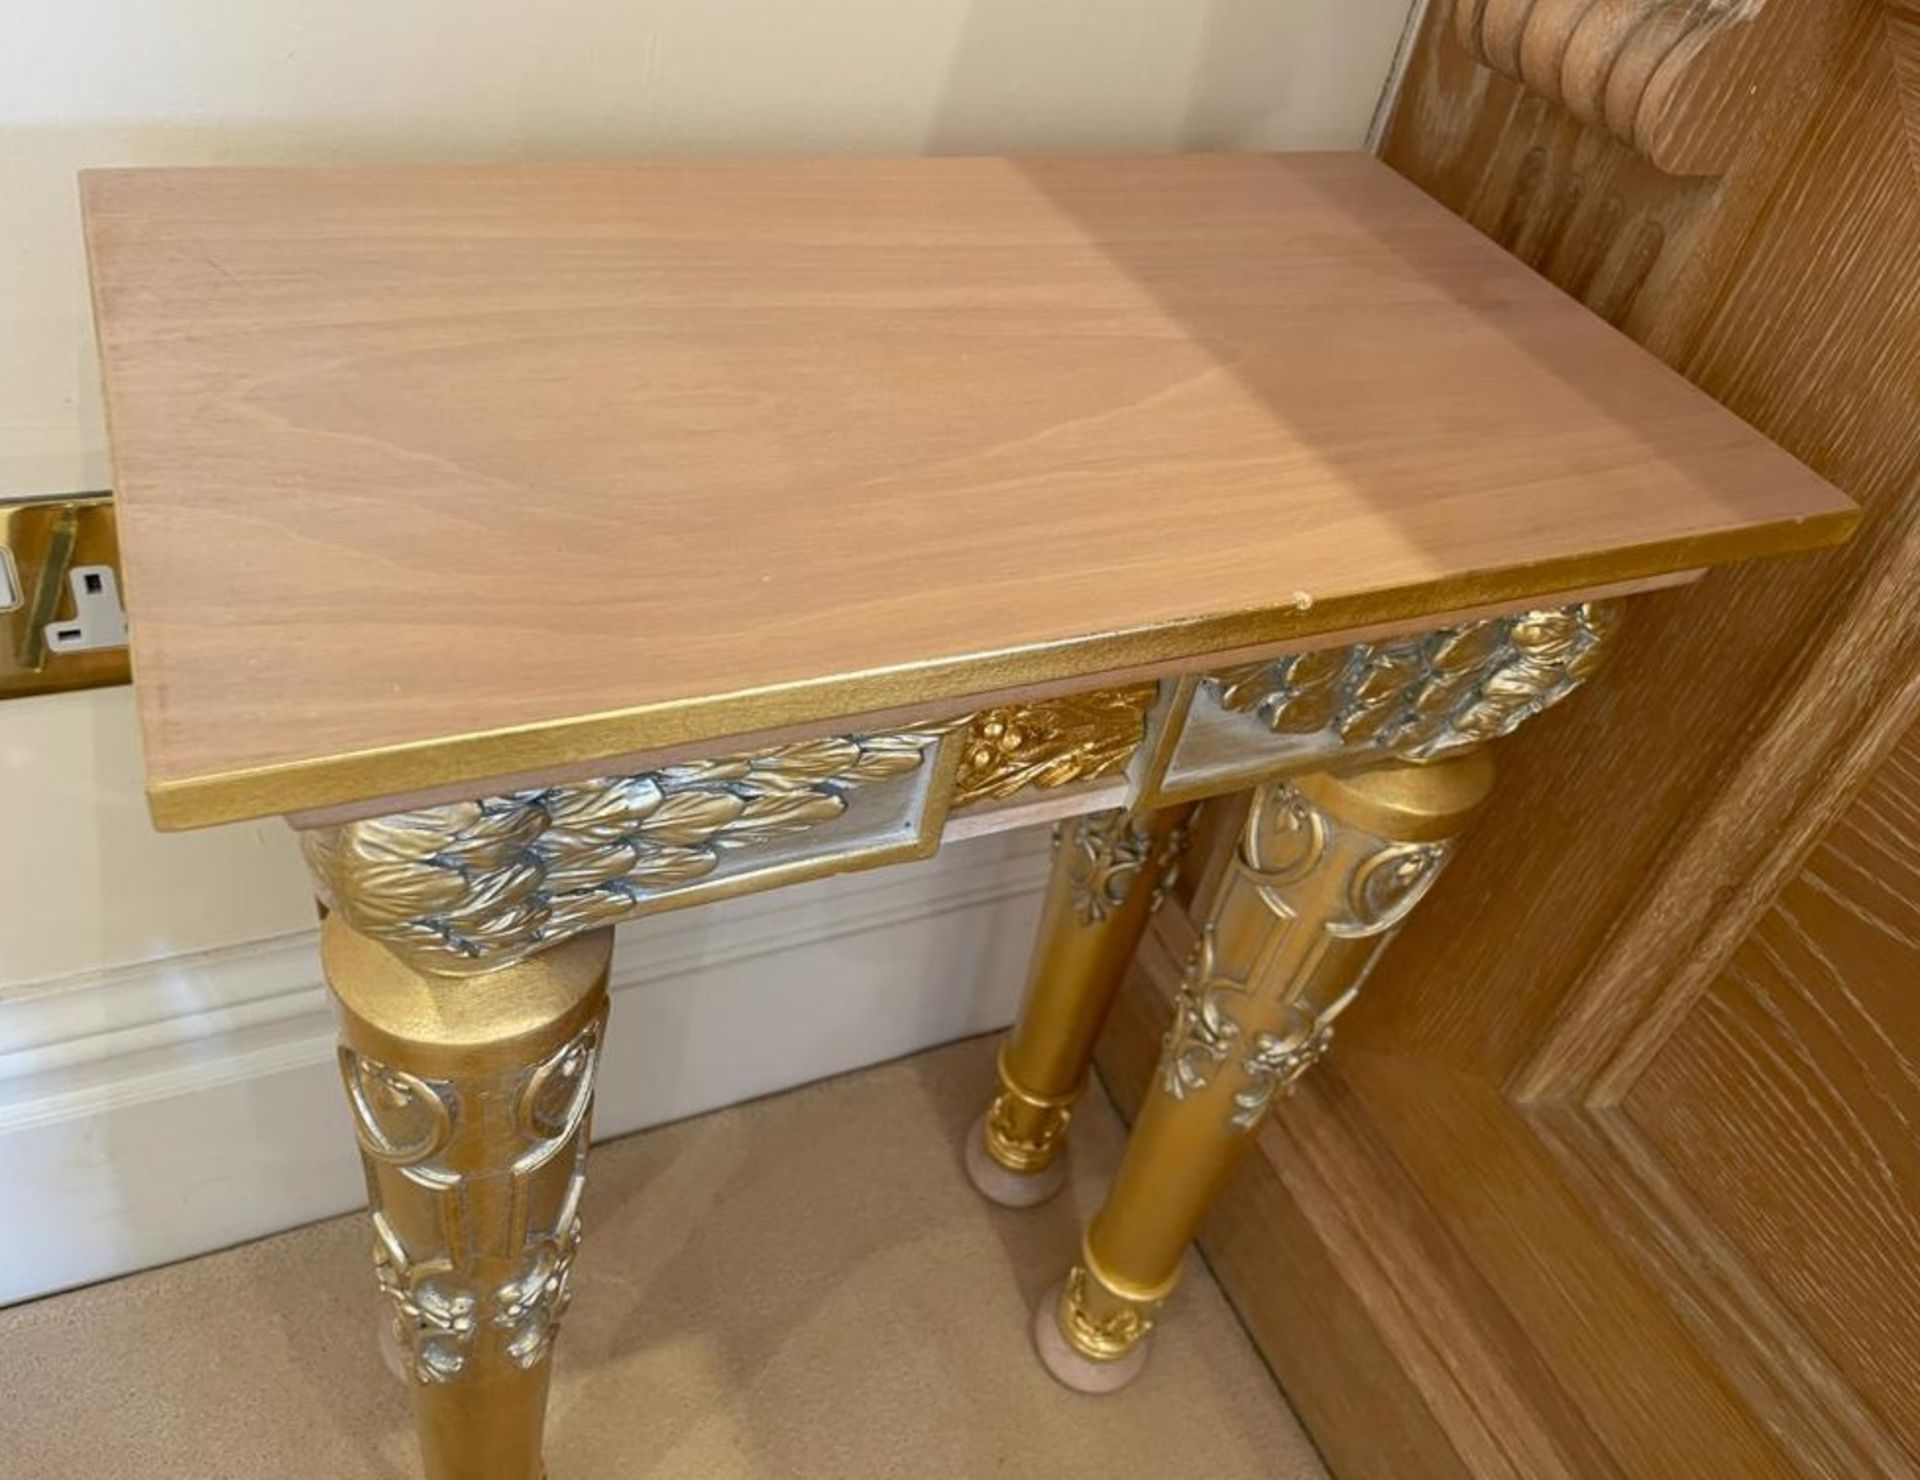 1 x Hand Carved Ornate Lamp Tables Complimented With Birchwood Veneer, Golden Pillar Legs, Carved - Image 9 of 10